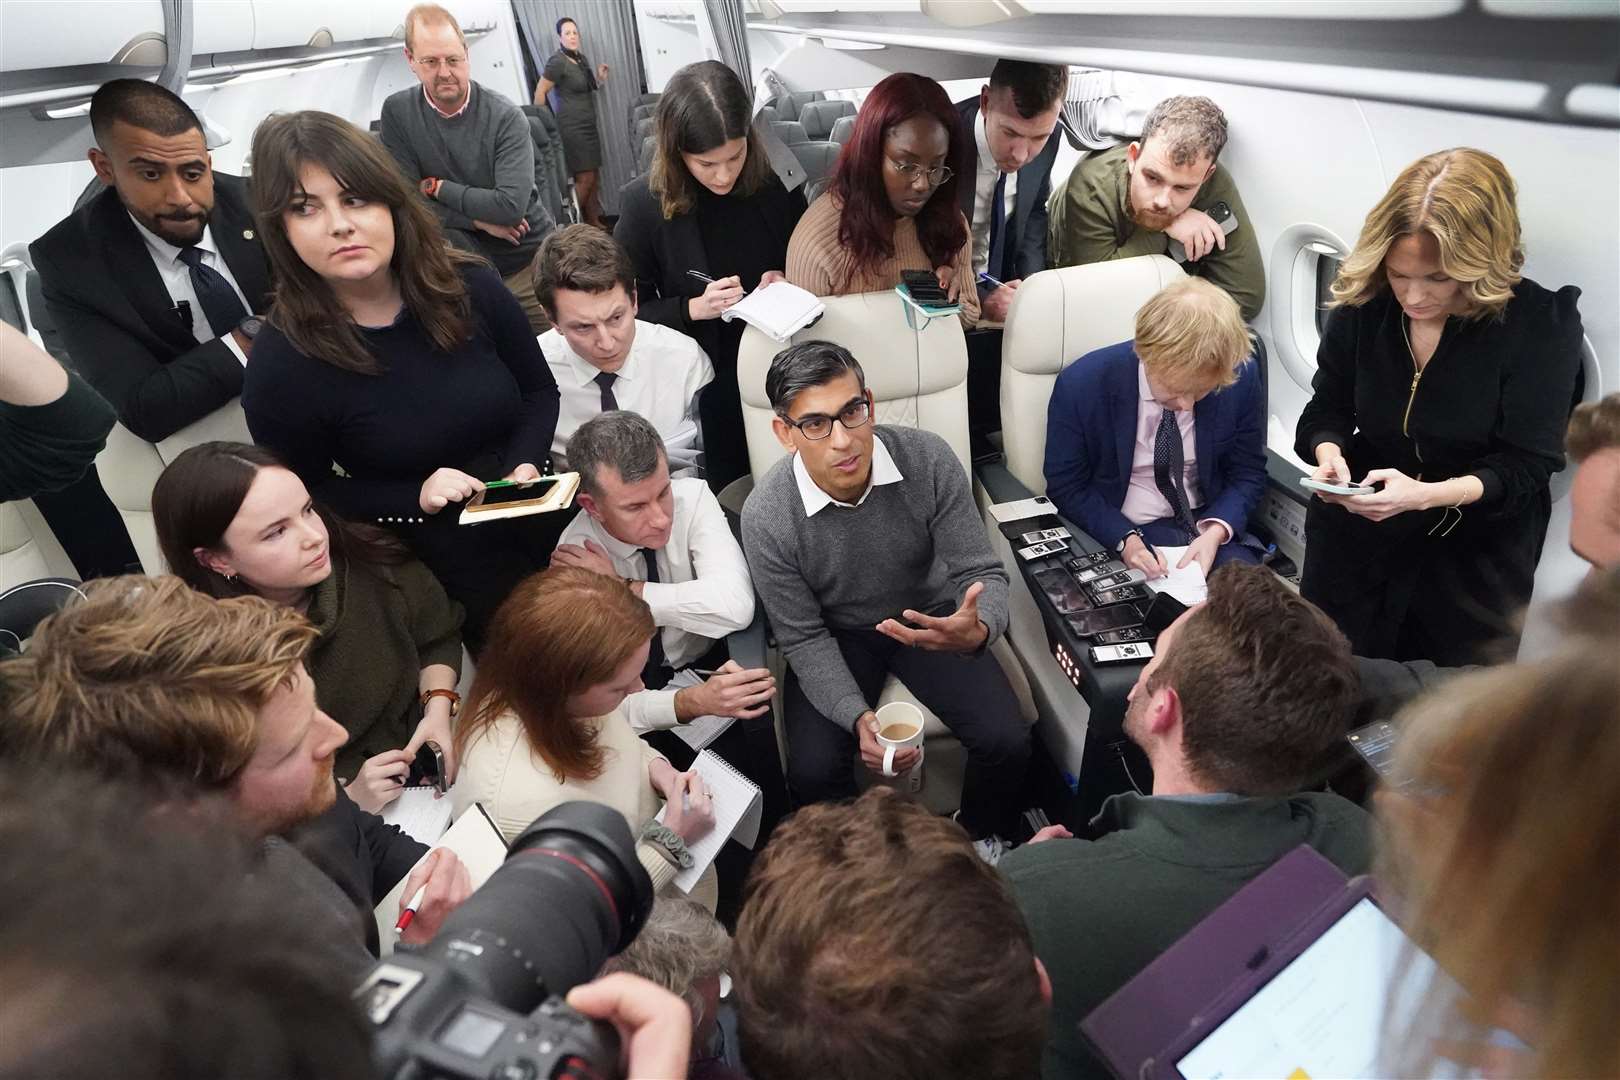 Prime Minister Rishi Sunak holds a ‘huddle’ press conference with political journalists on the flight to Dubai (Stefan Rousseau/PA)